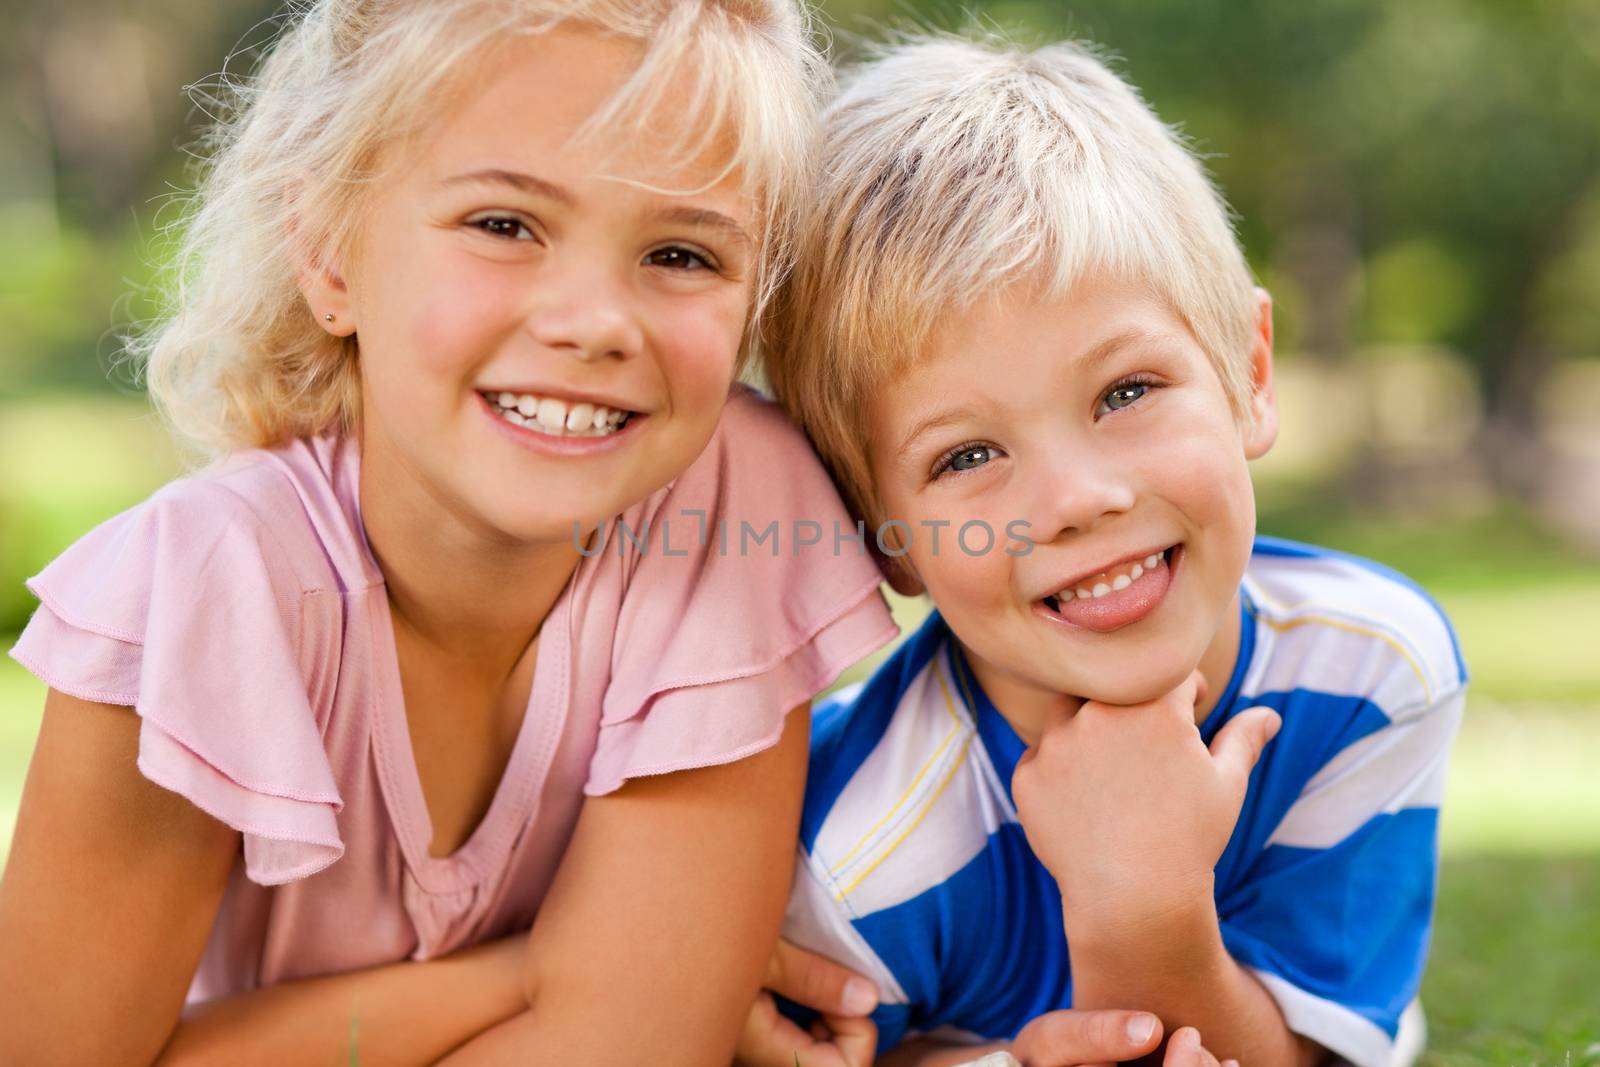 Boy with his sister in the park by Wavebreakmedia